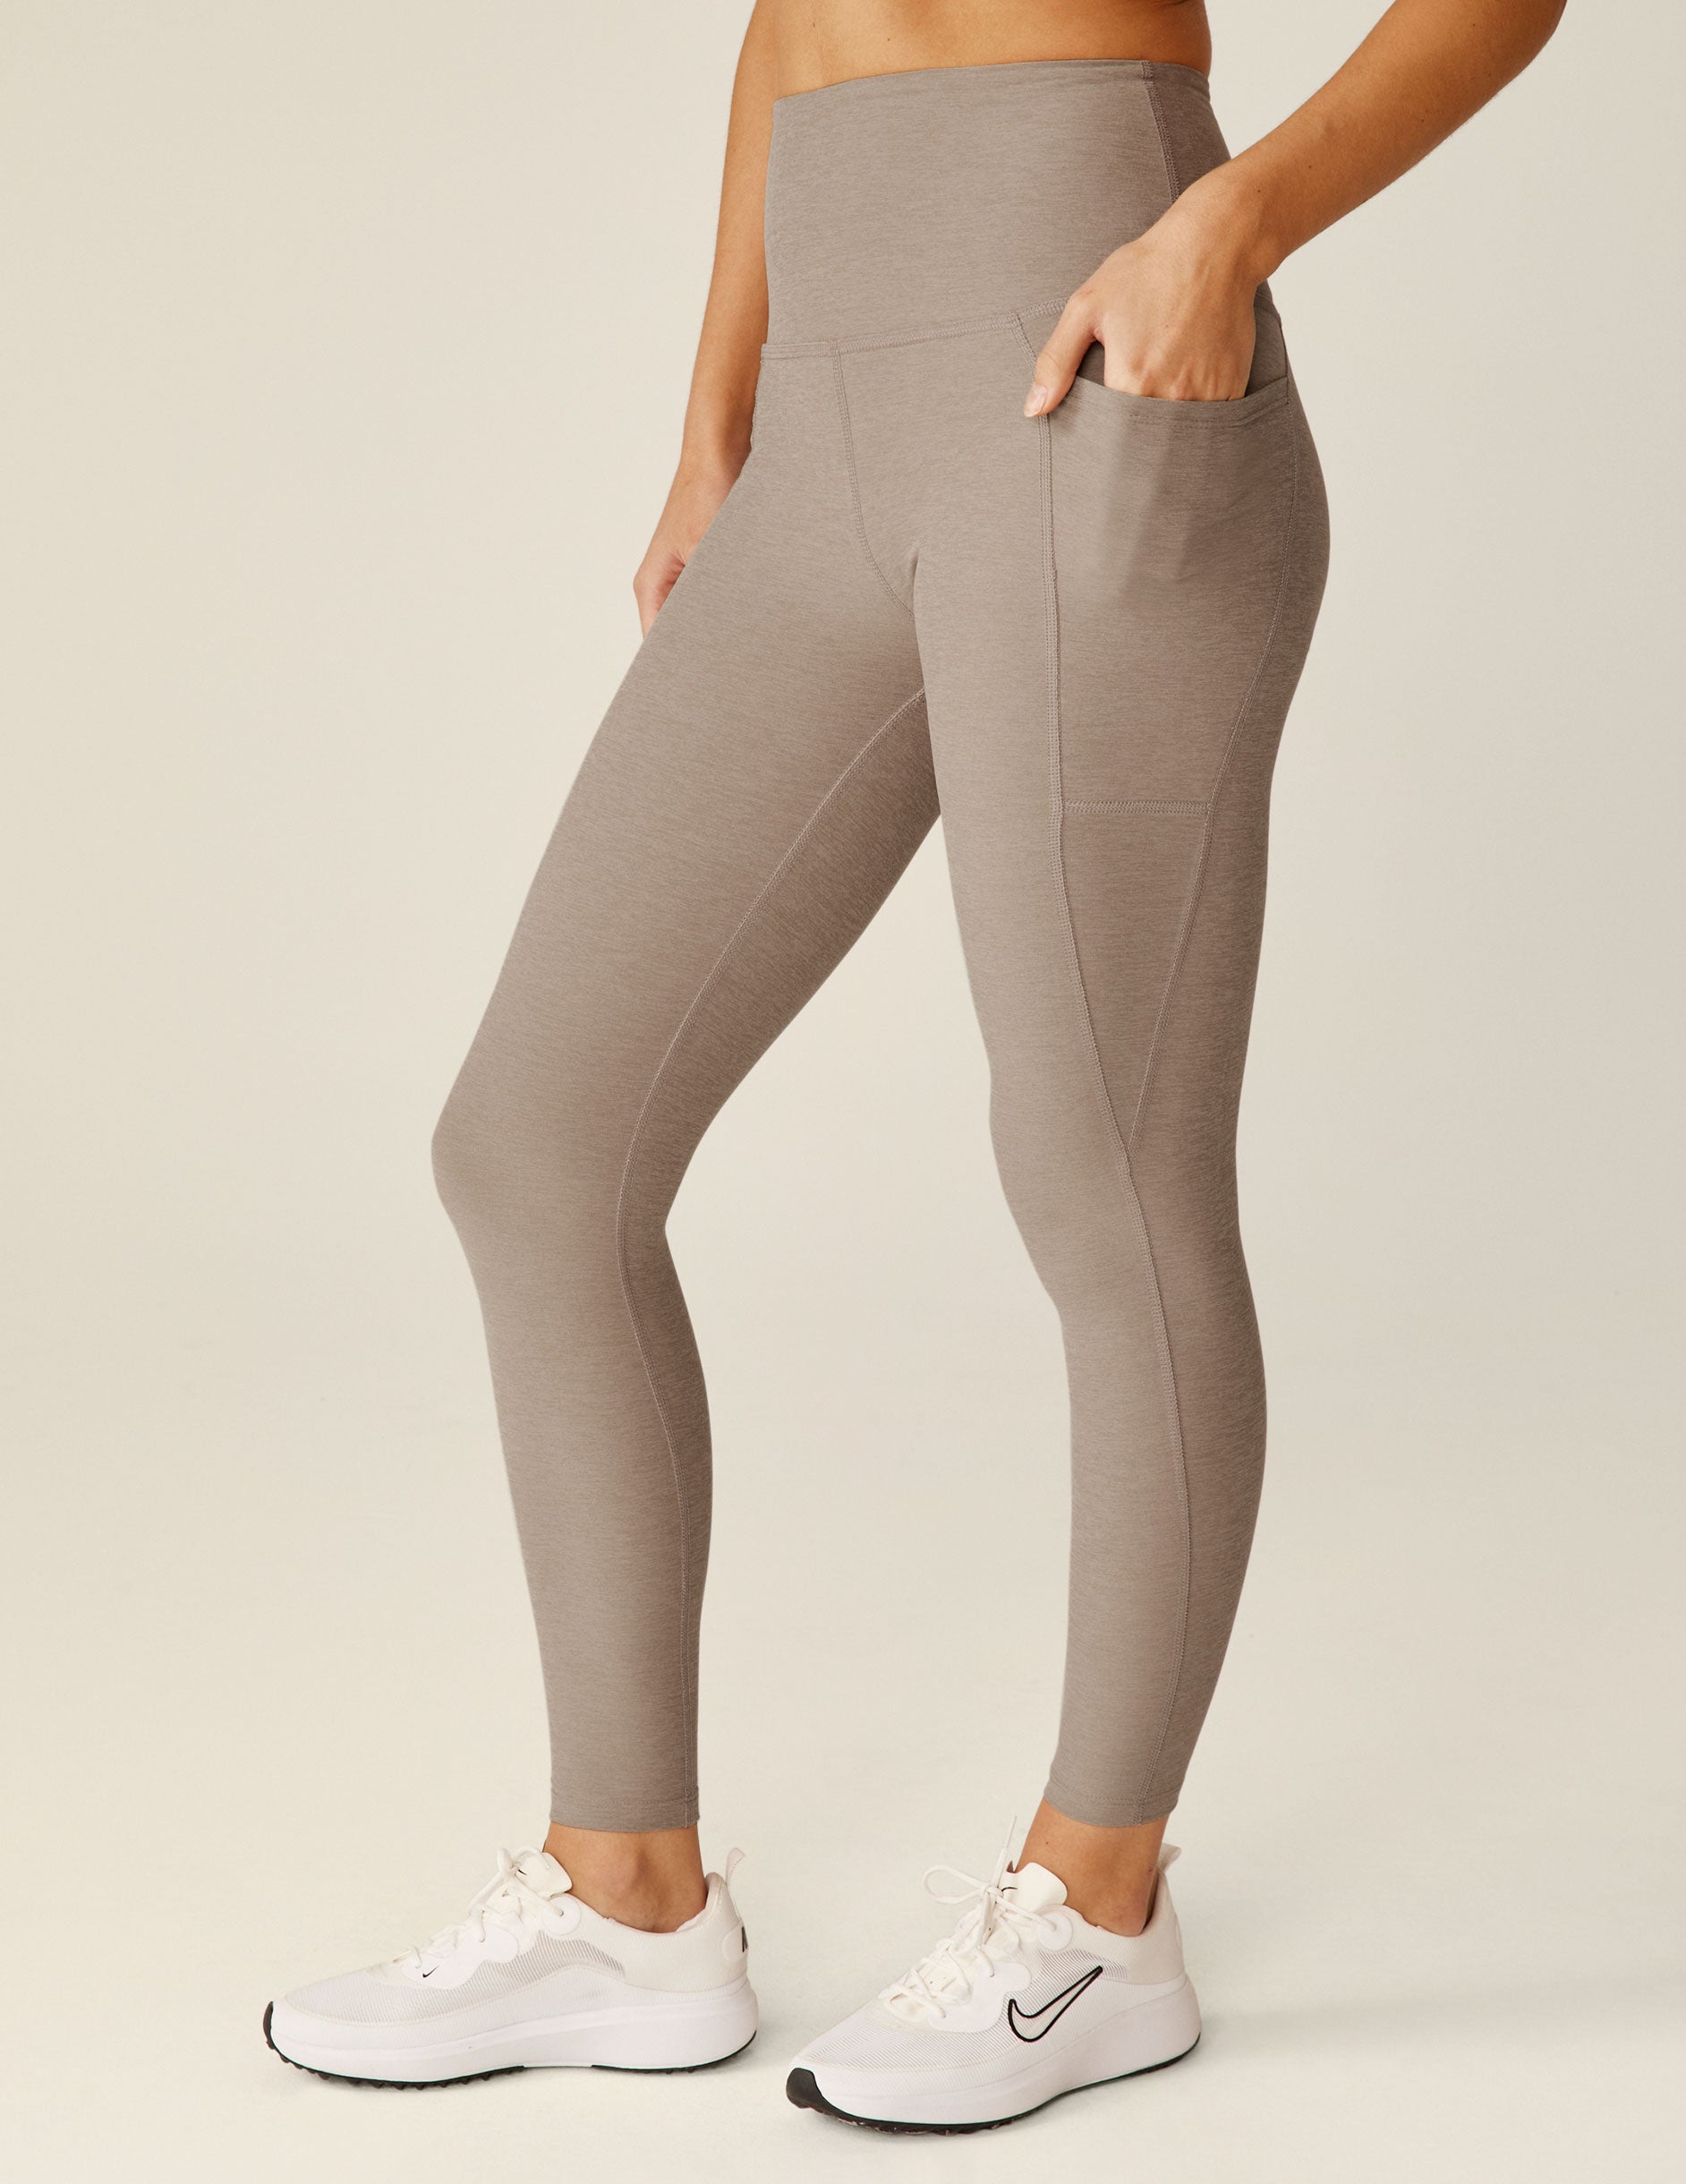 NEW BEYOND YOGA Out Of Pocket High Waisted Midi Legging Size: Small